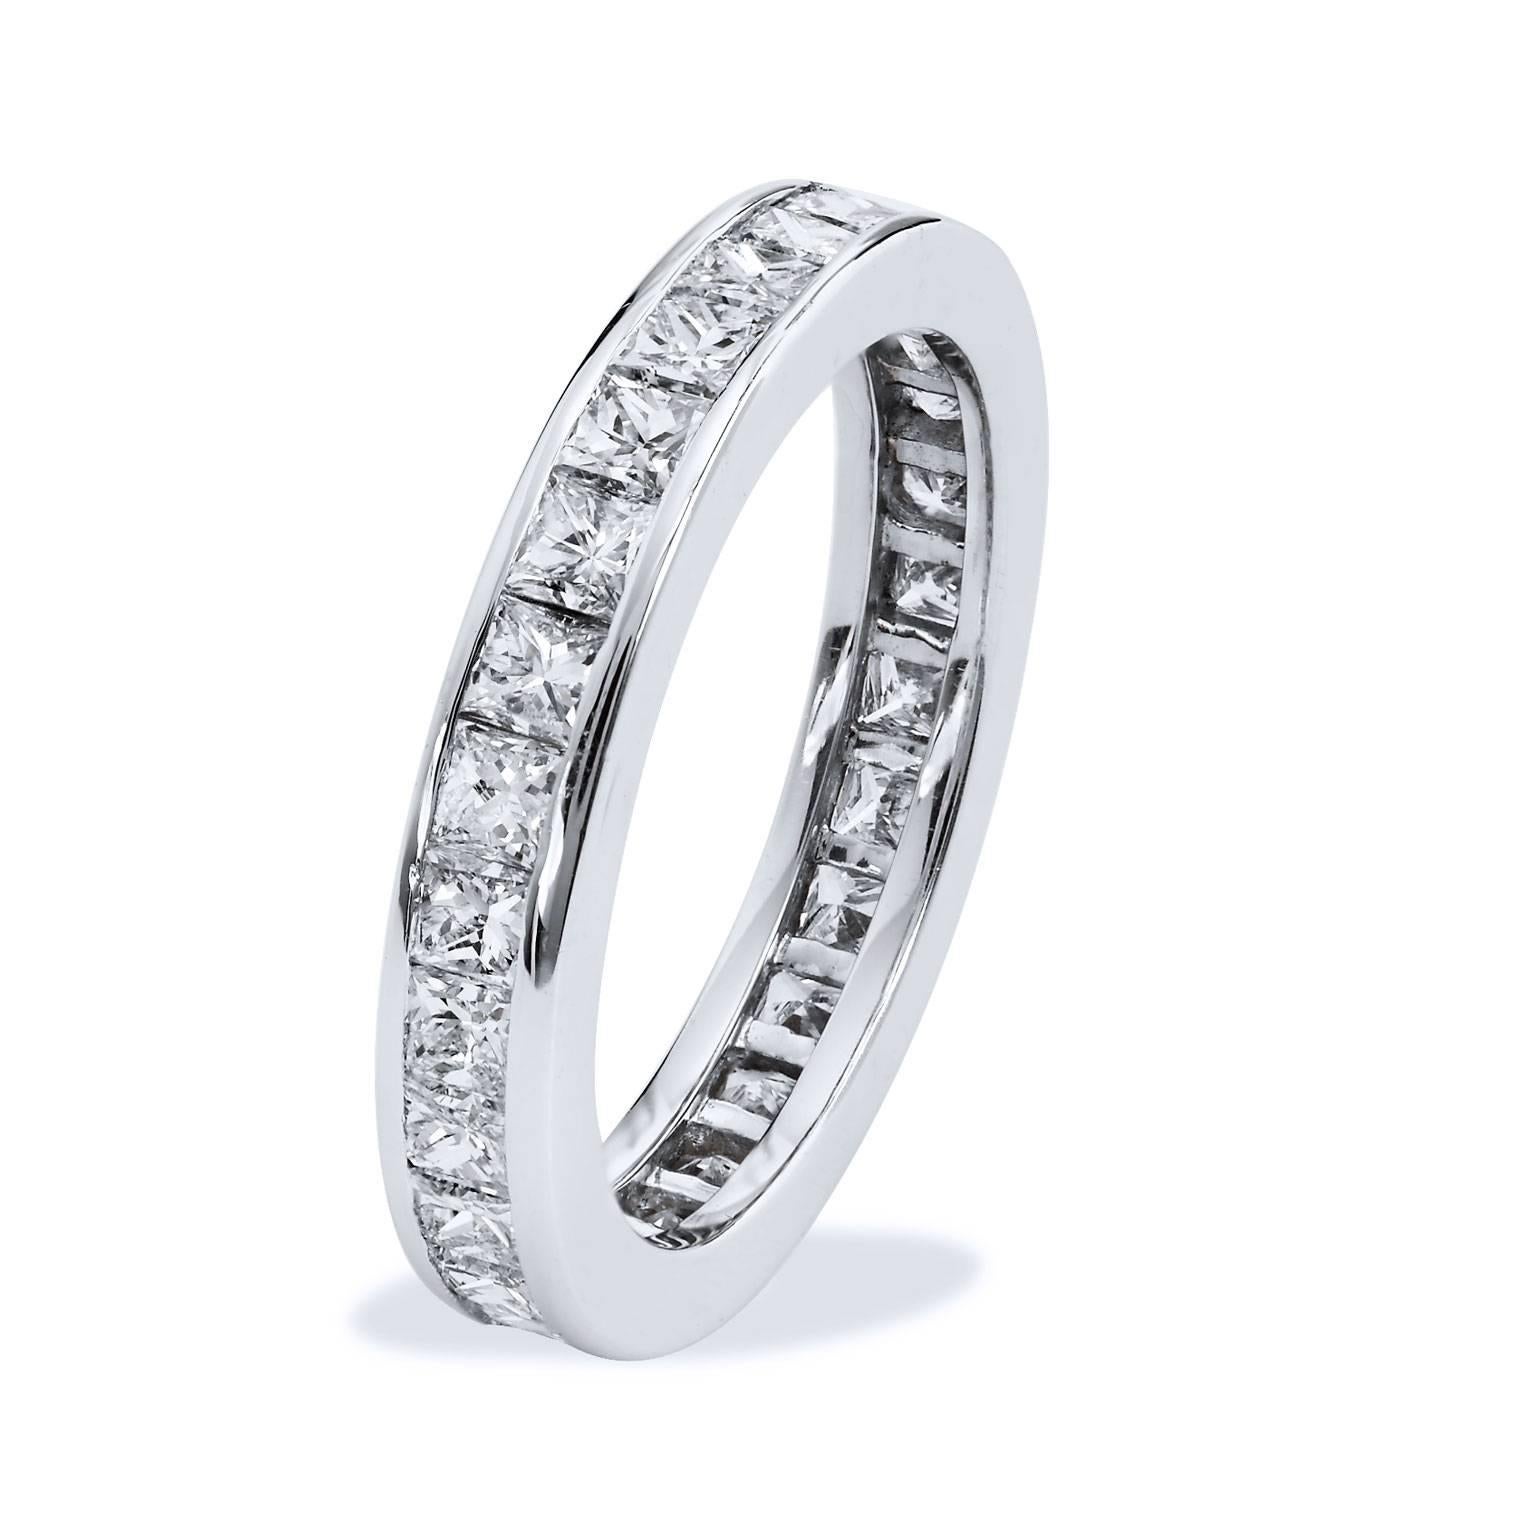 Enjoy this previously loved 14 karat white gold band ring featuring 3.00 carat of channel set princess cut diamonds. 